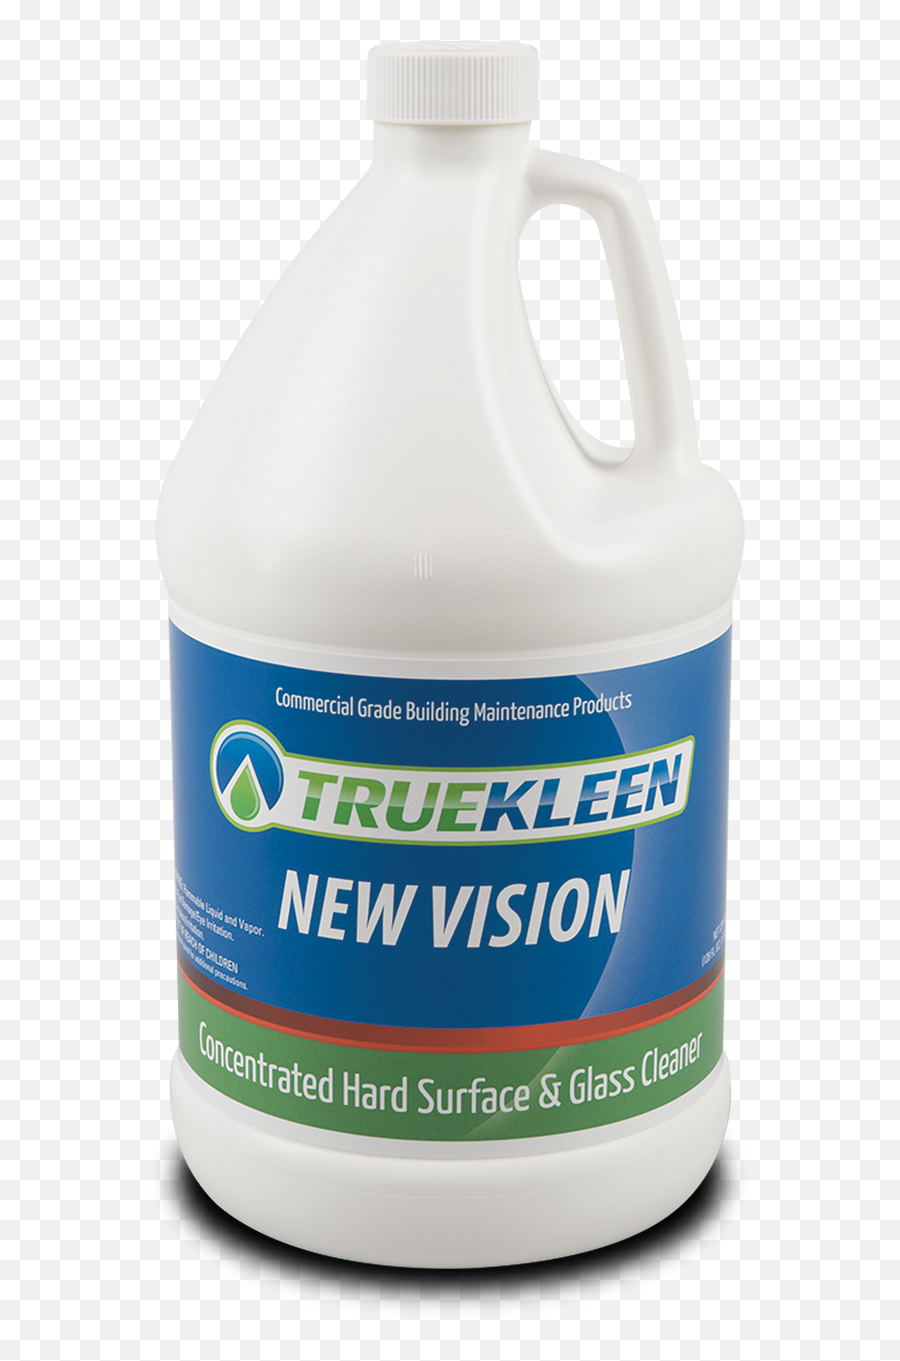 Truekleen New Vision Concentrated Glass Cleaner Emoji,Windex Png